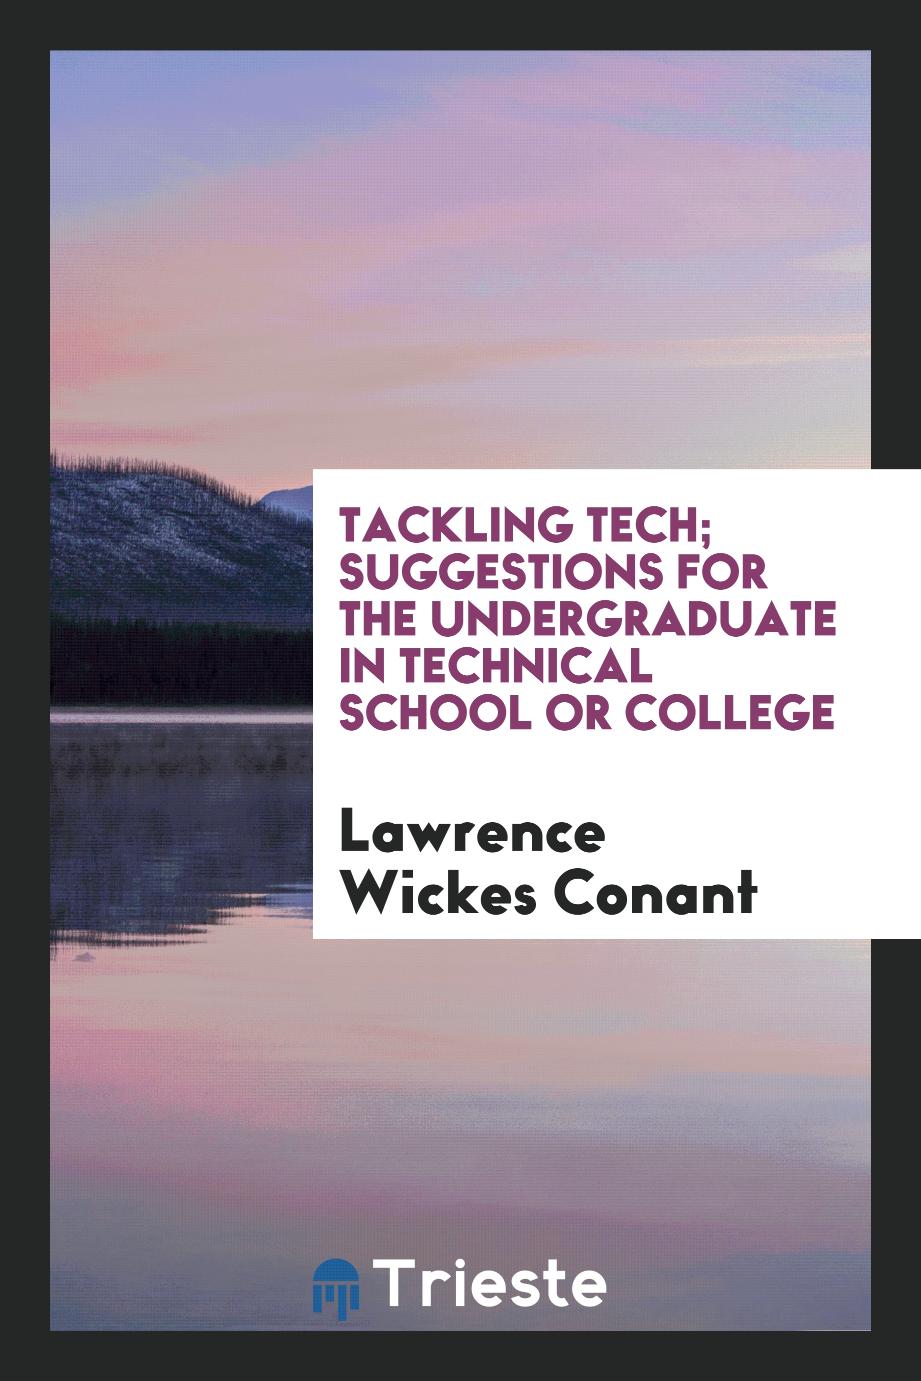 Tackling tech; suggestions for the undergraduate in technical school or college